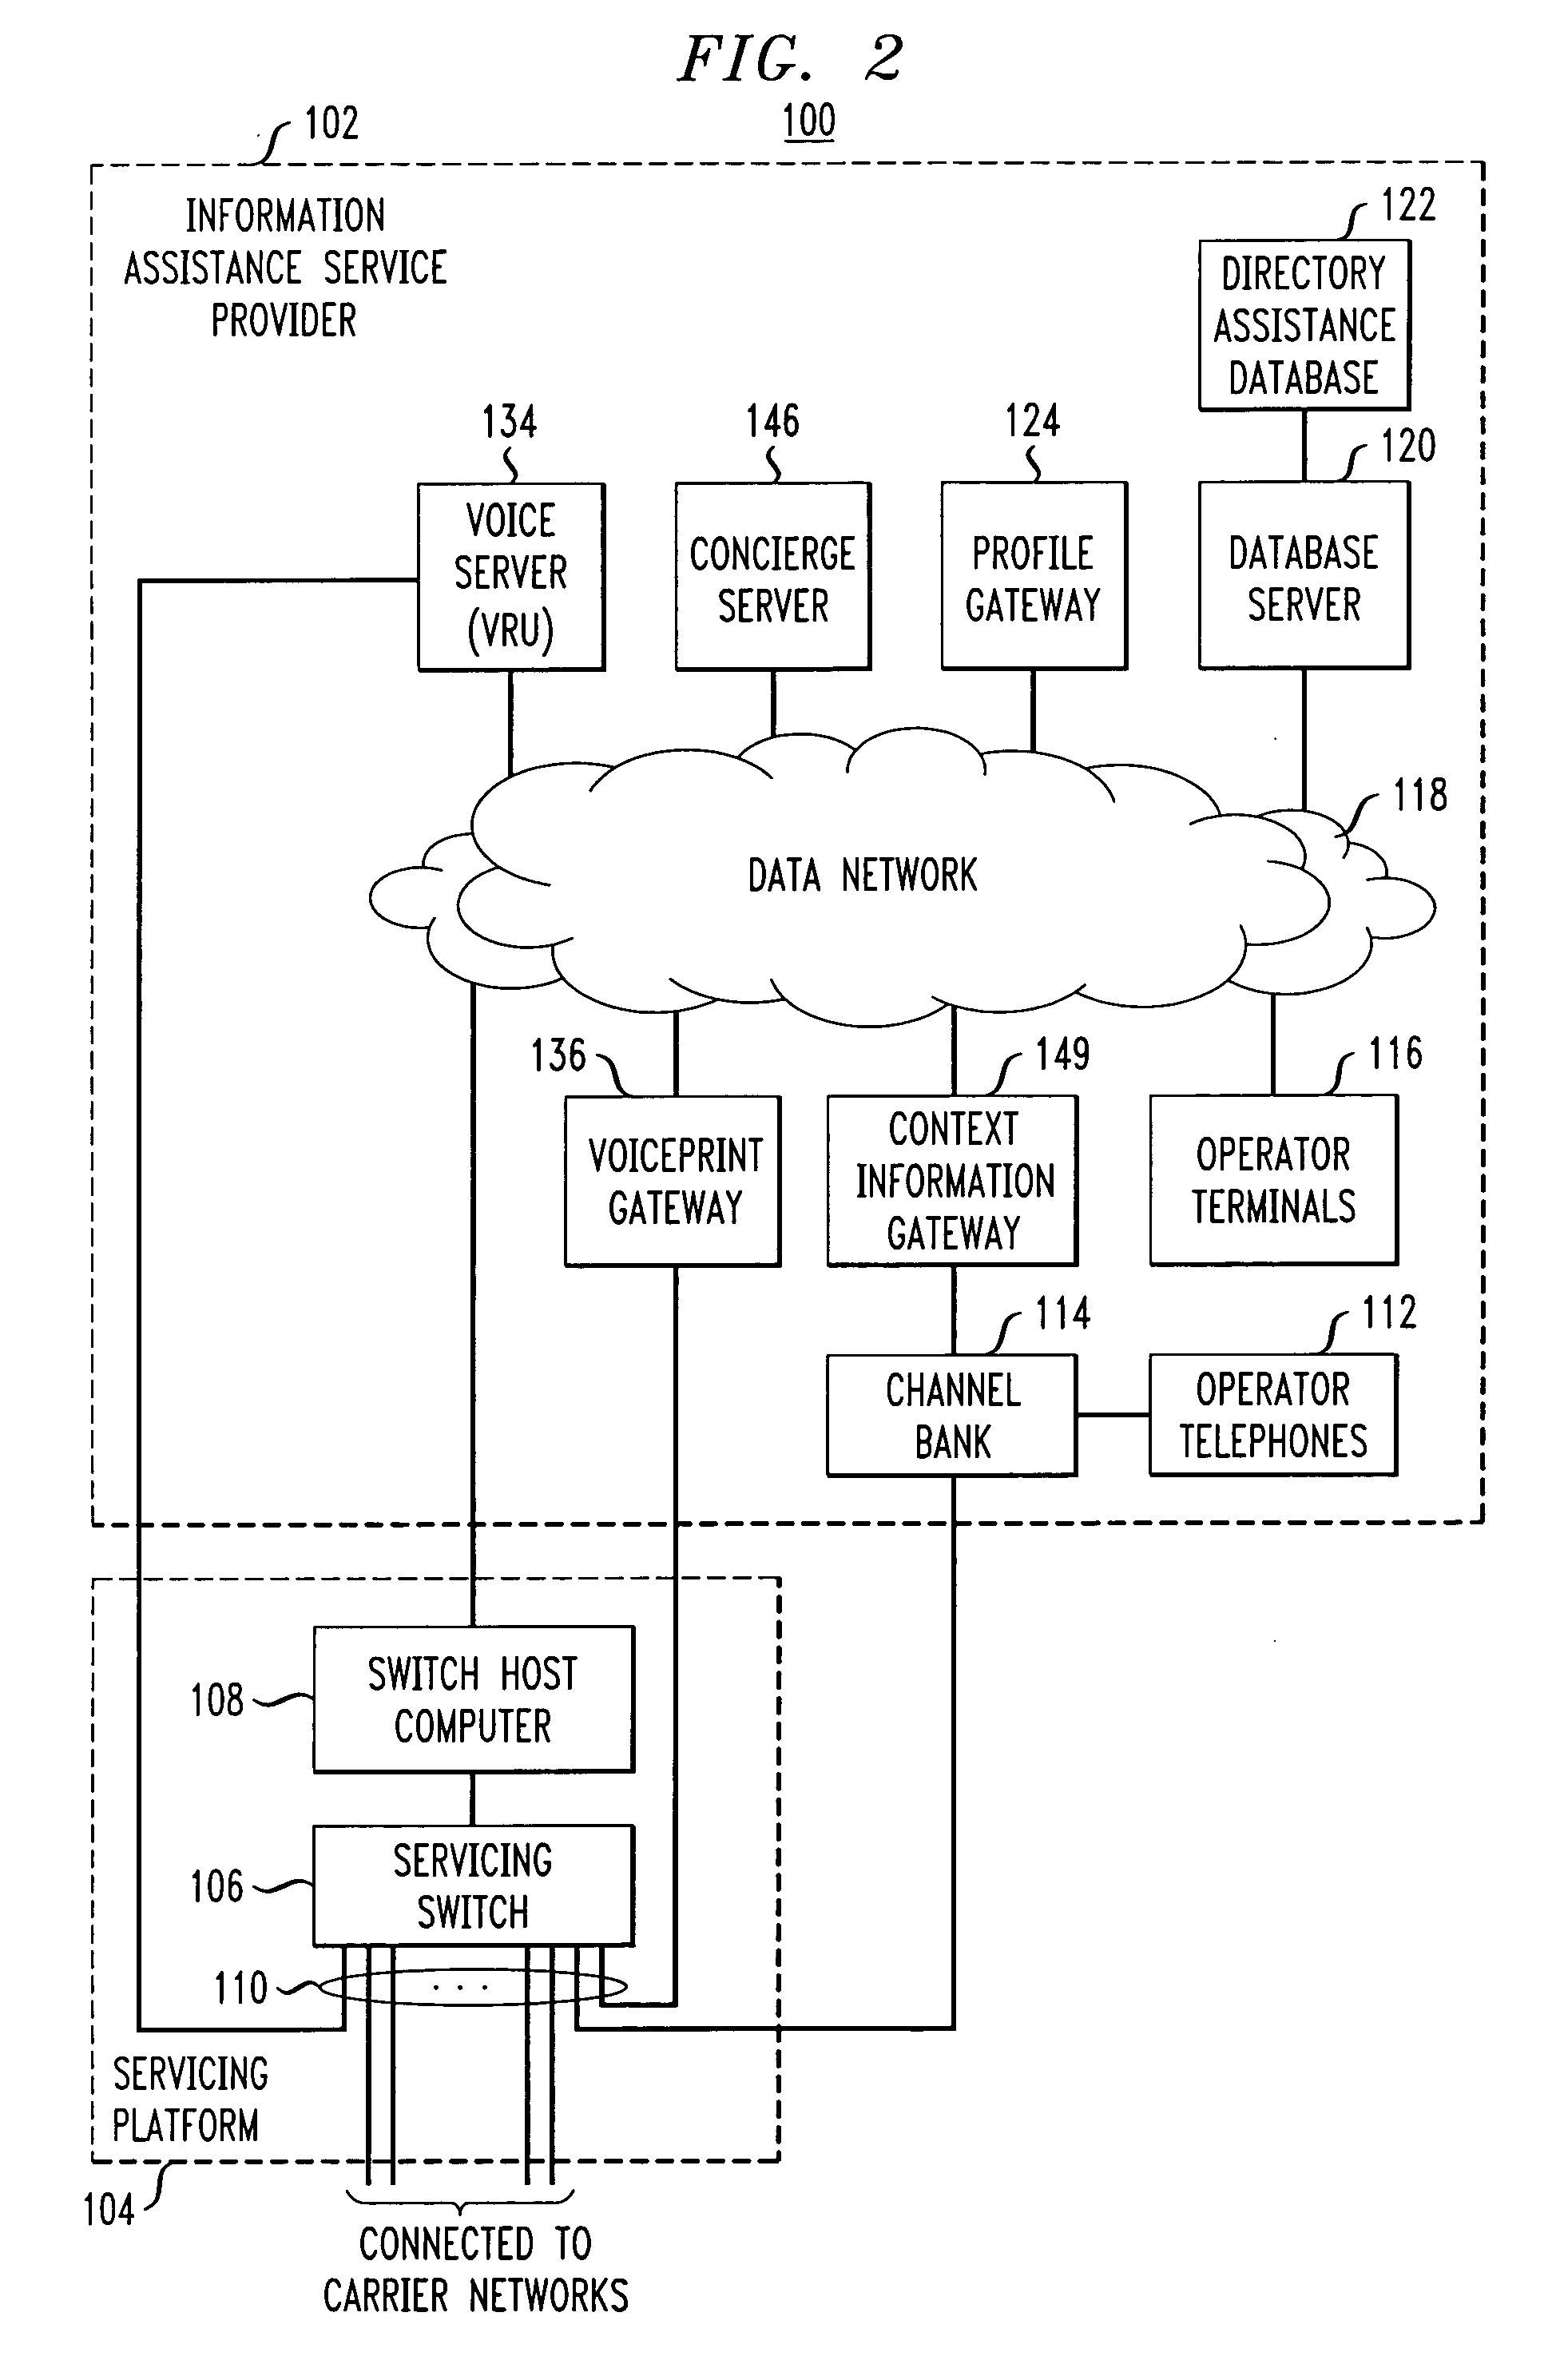 Technique for continually assisting a user during an information assistance call